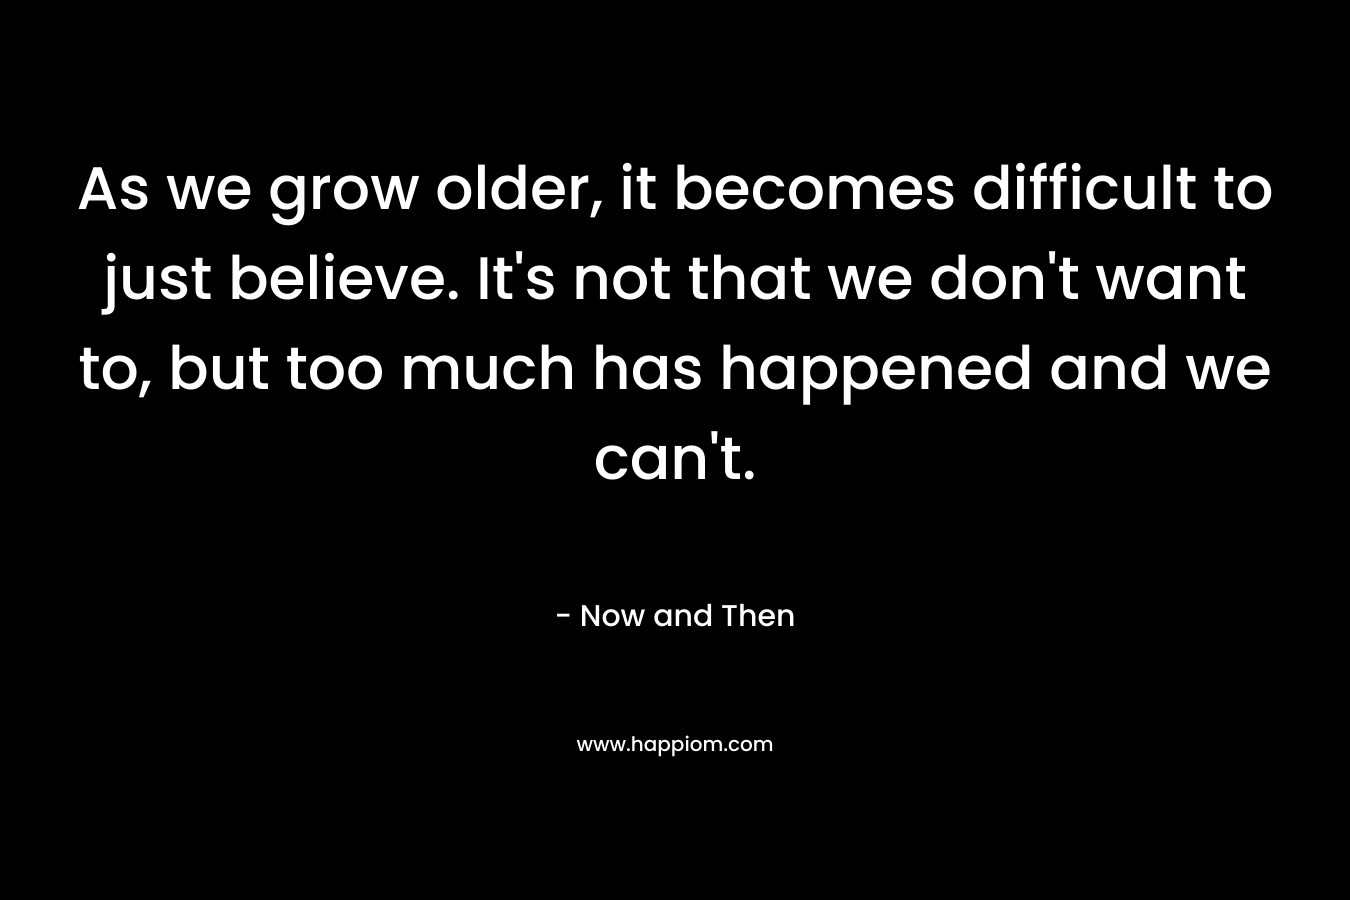 As we grow older, it becomes difficult to just believe. It’s not that we don’t want to, but too much has happened and we can’t. – Now and Then